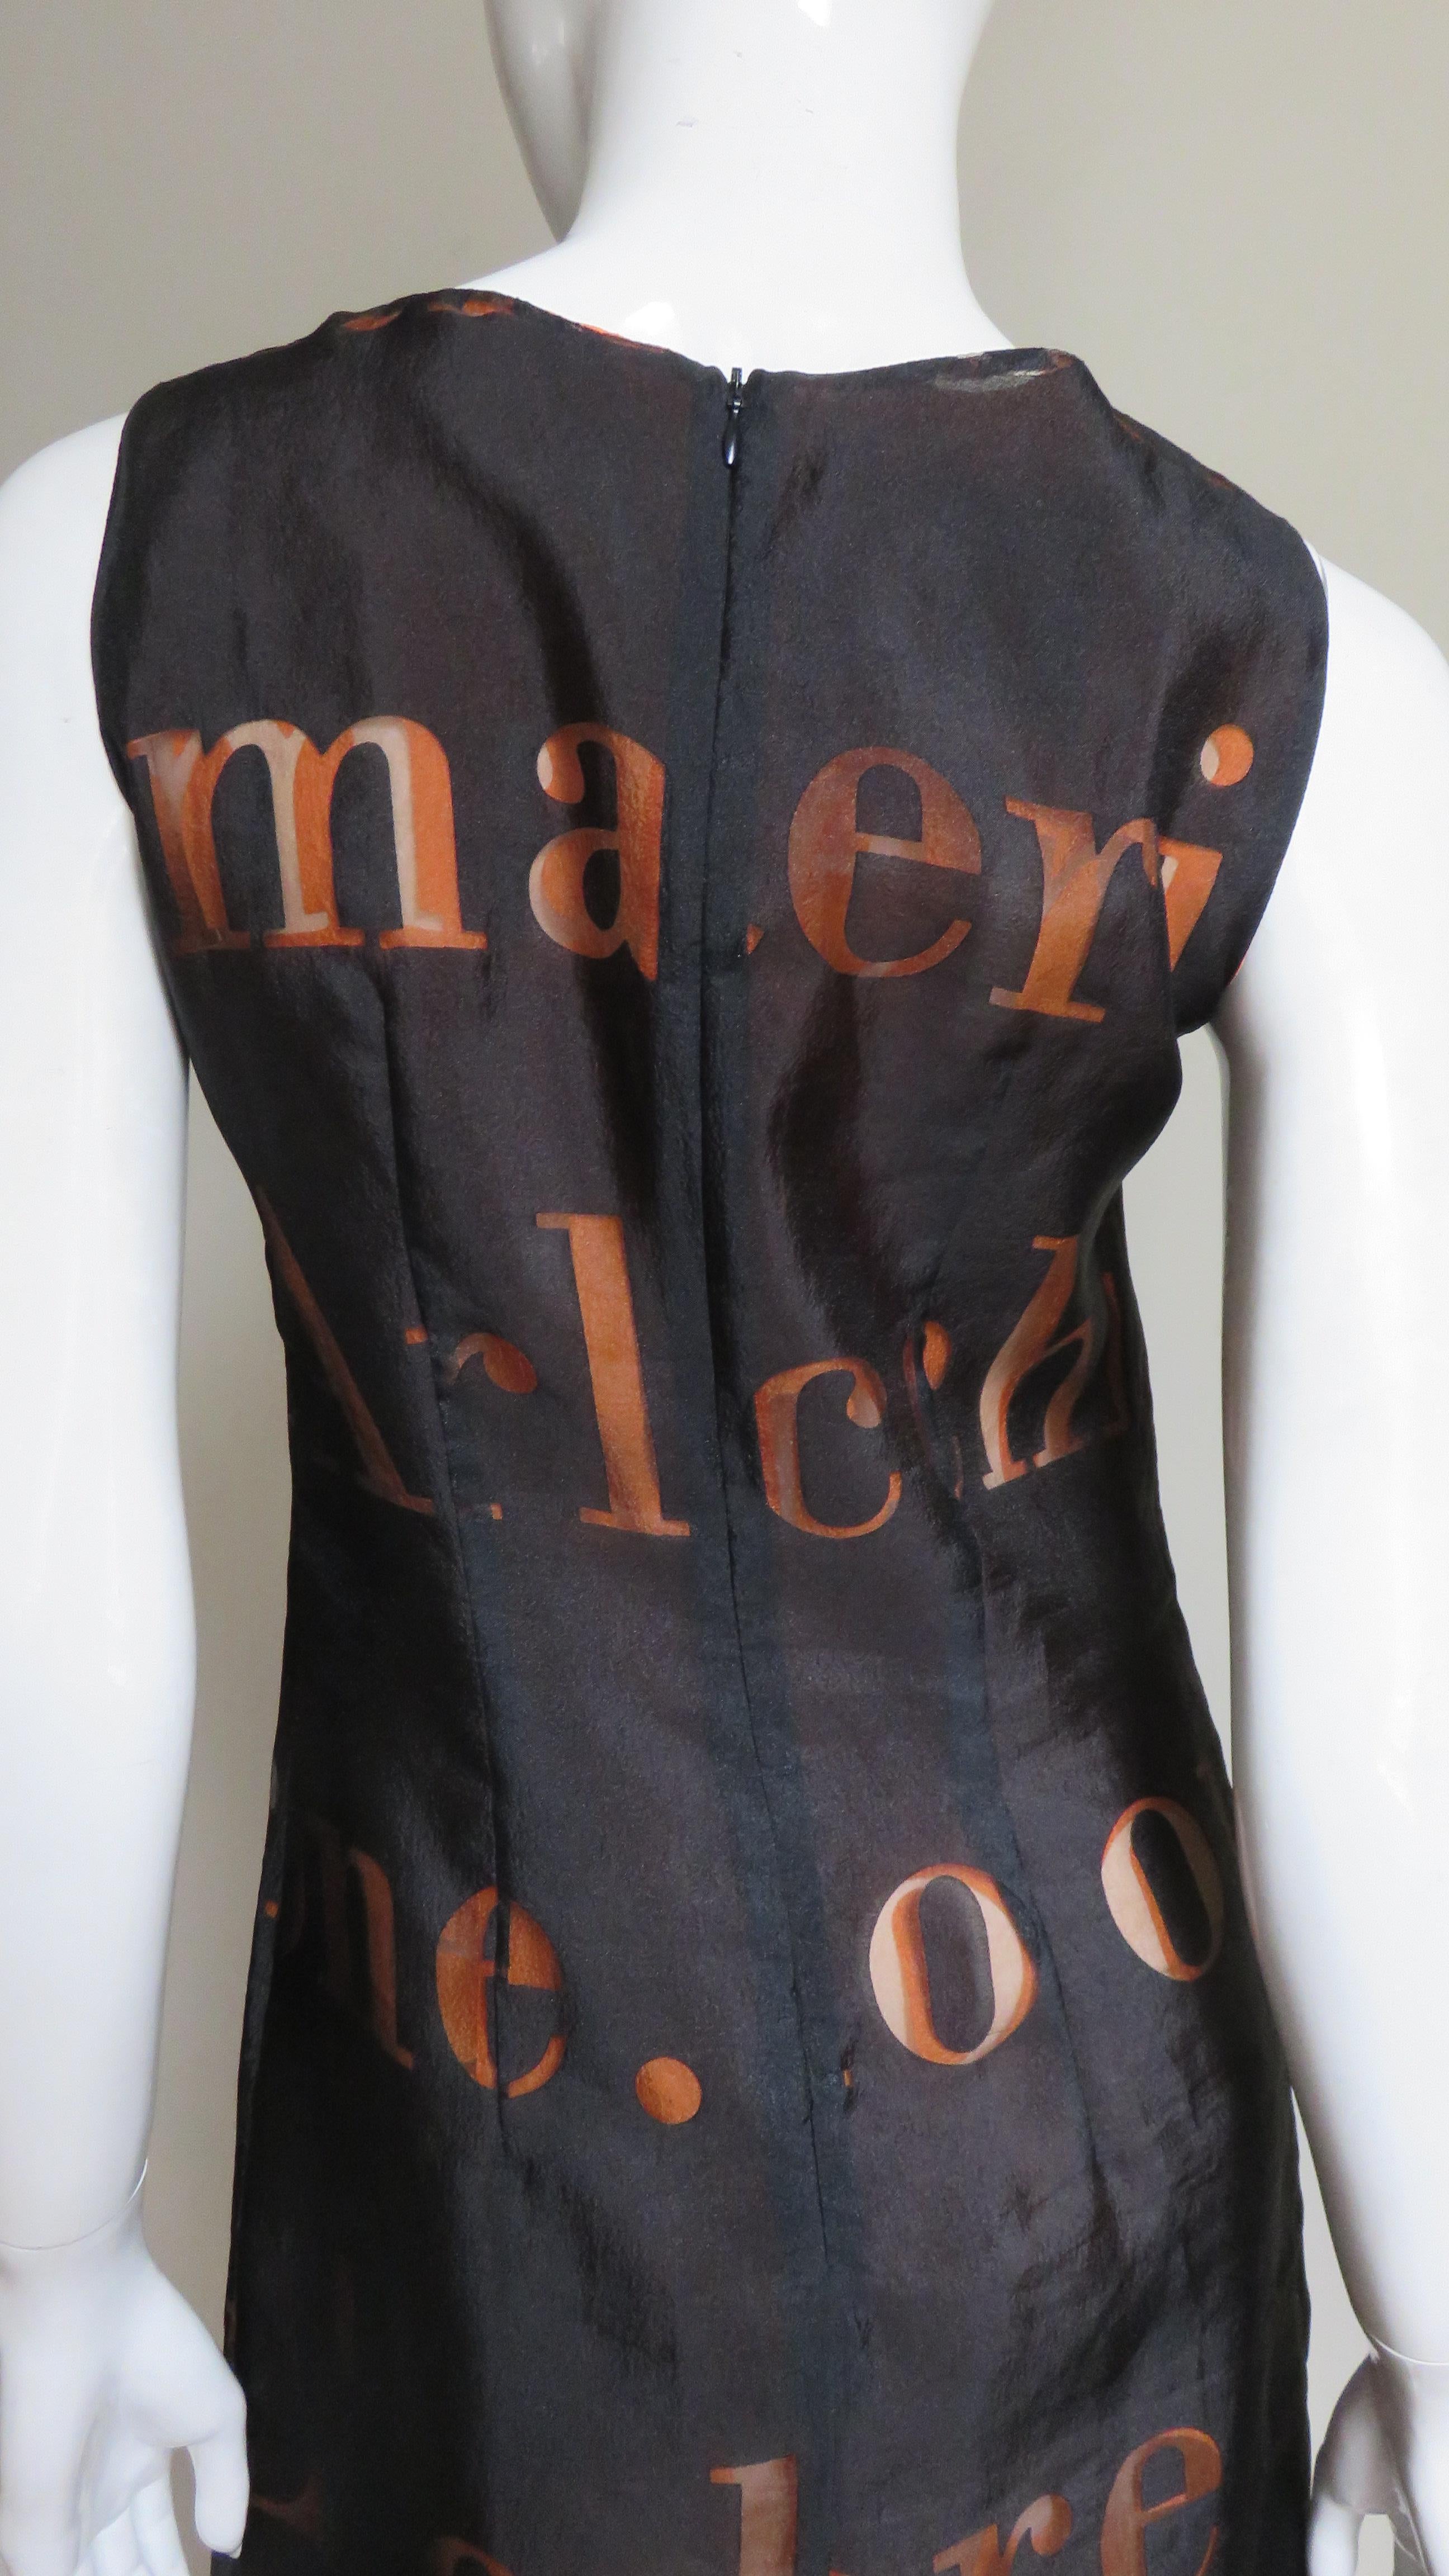 Moschino Dress with Letter Pattern For Sale 7